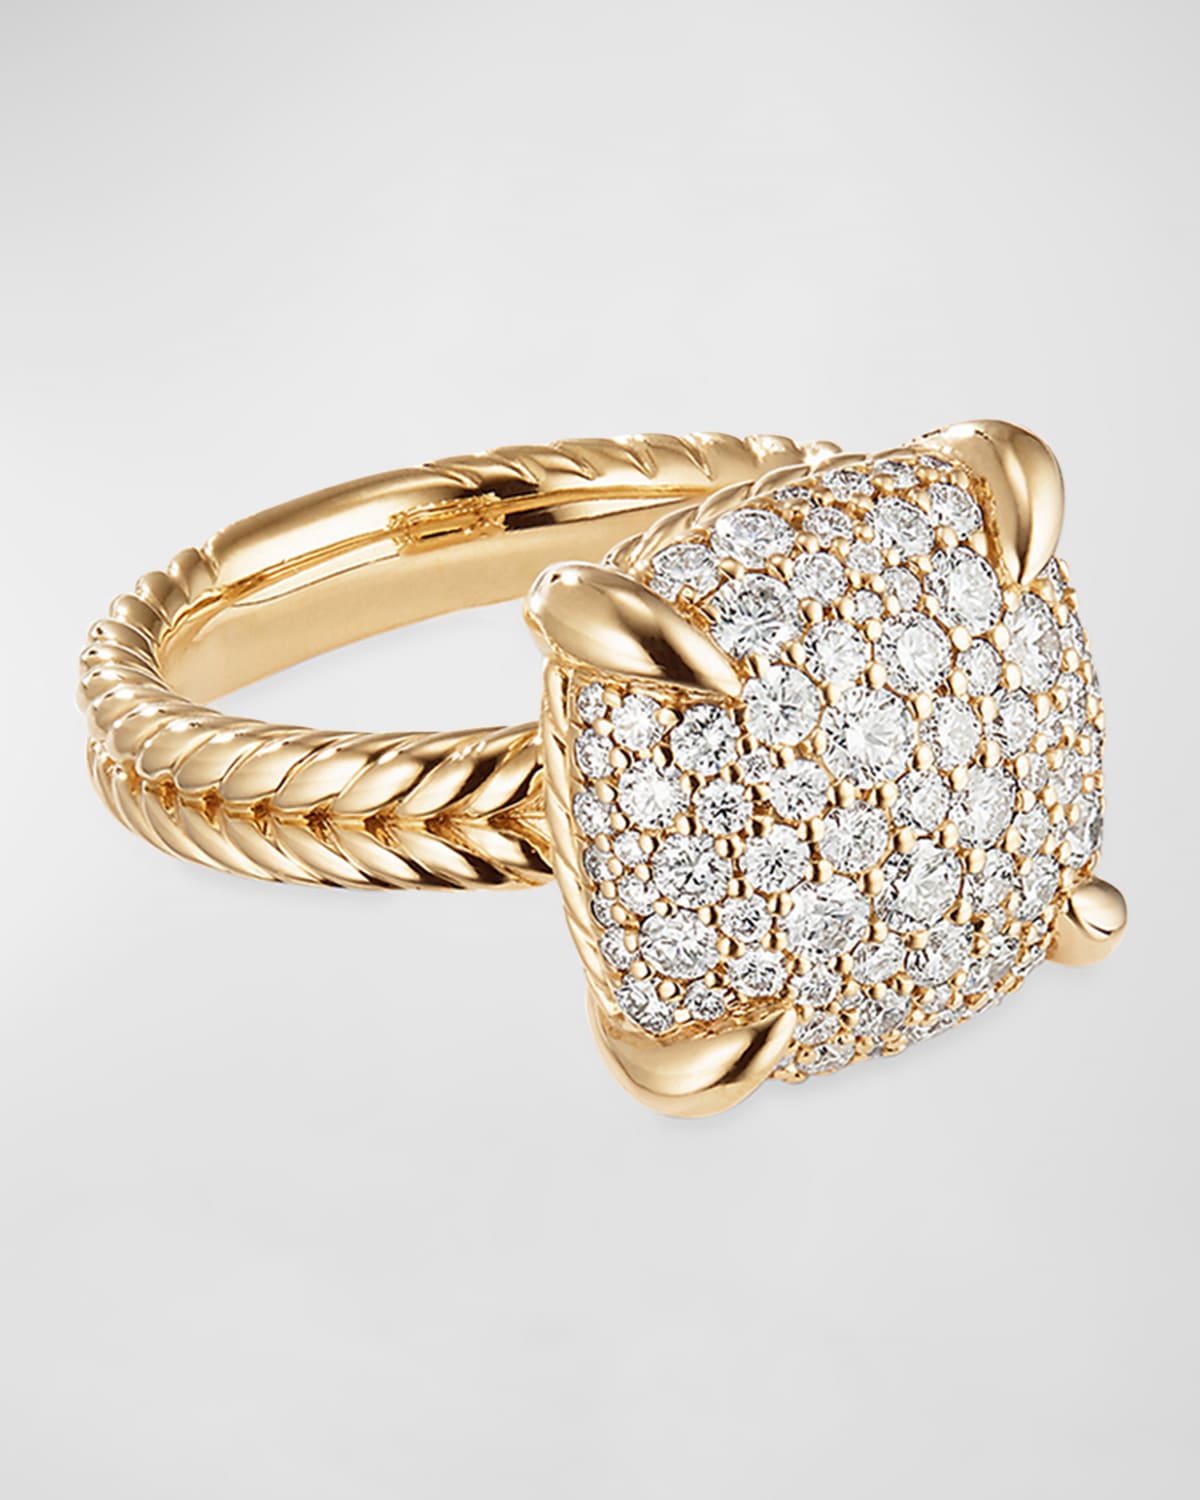 David Yurman Chatelaine Ring in 18K Yellow Gold with Full Pave Diamonds